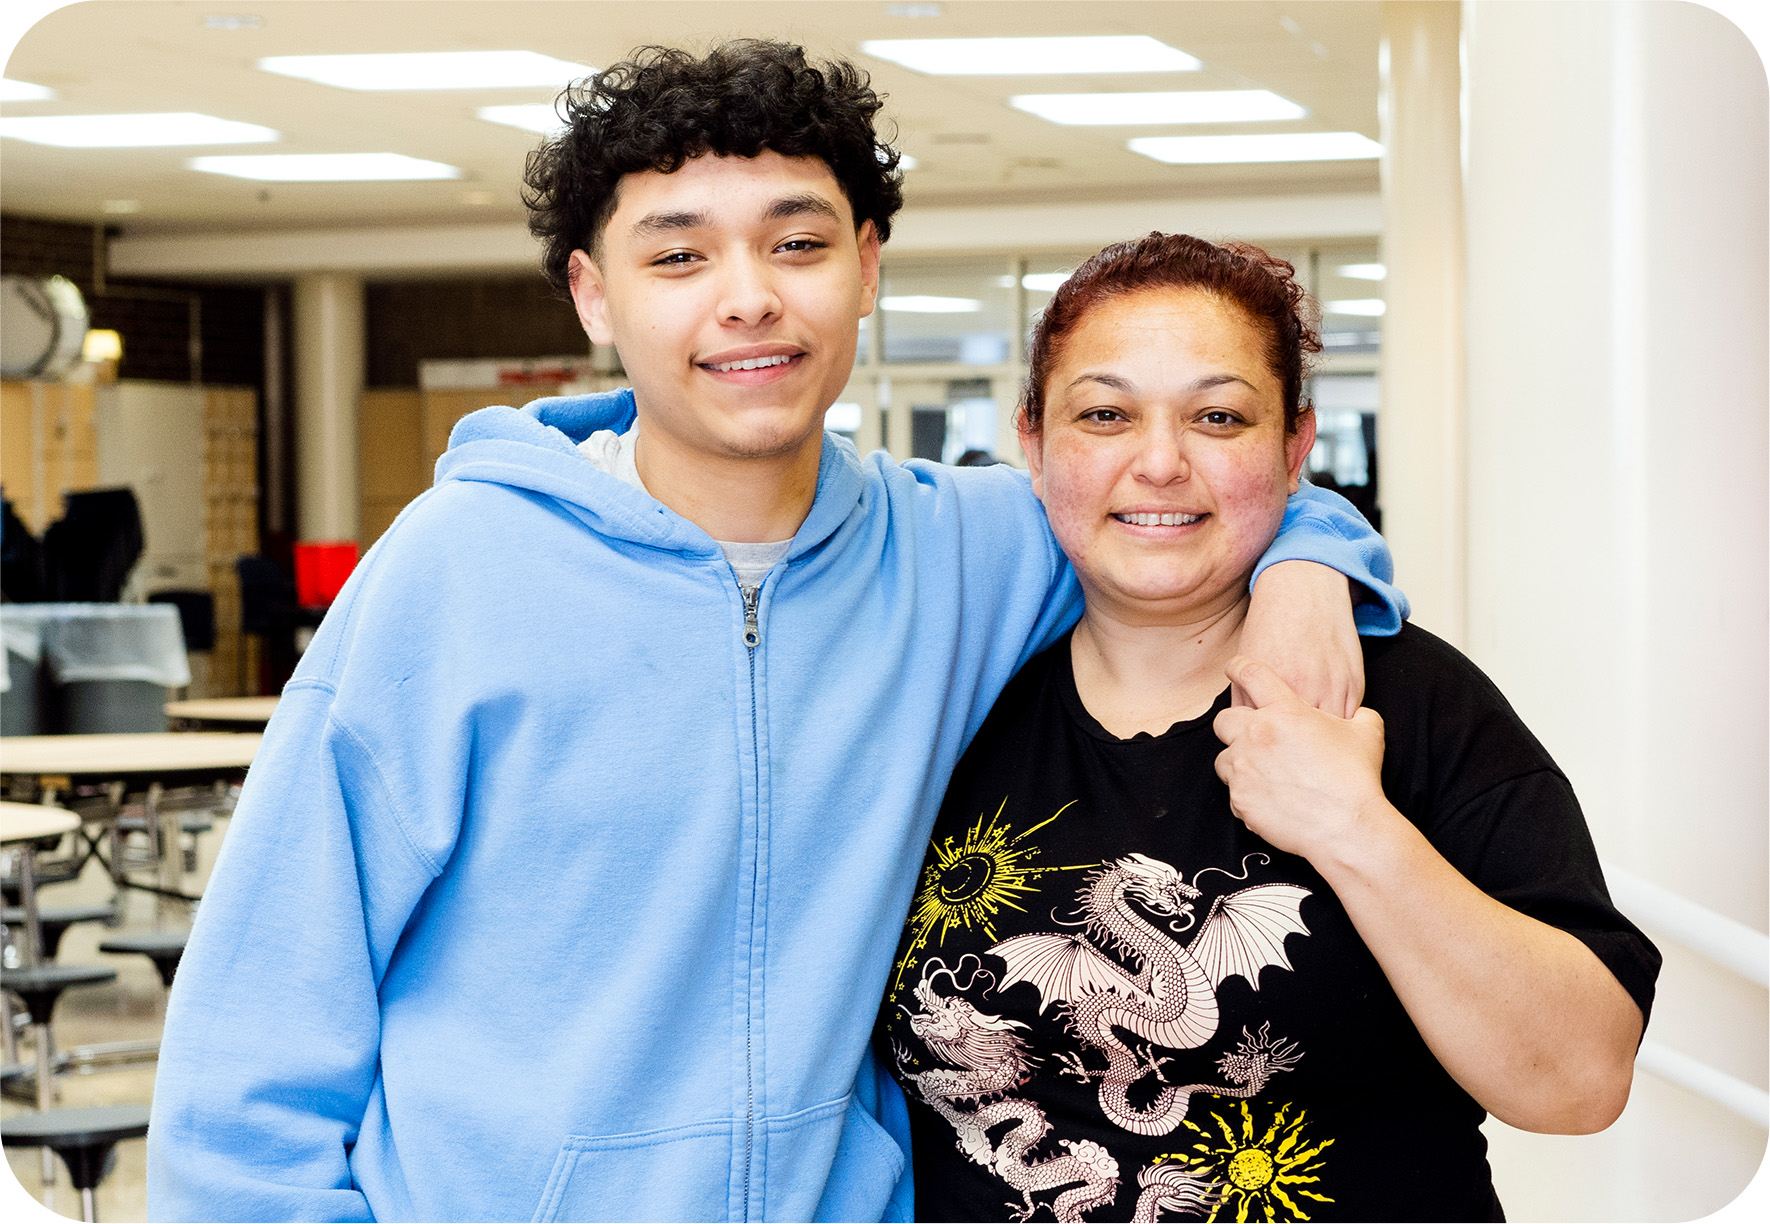 A mom and son smiling together after the young man received a meal from the youth program.